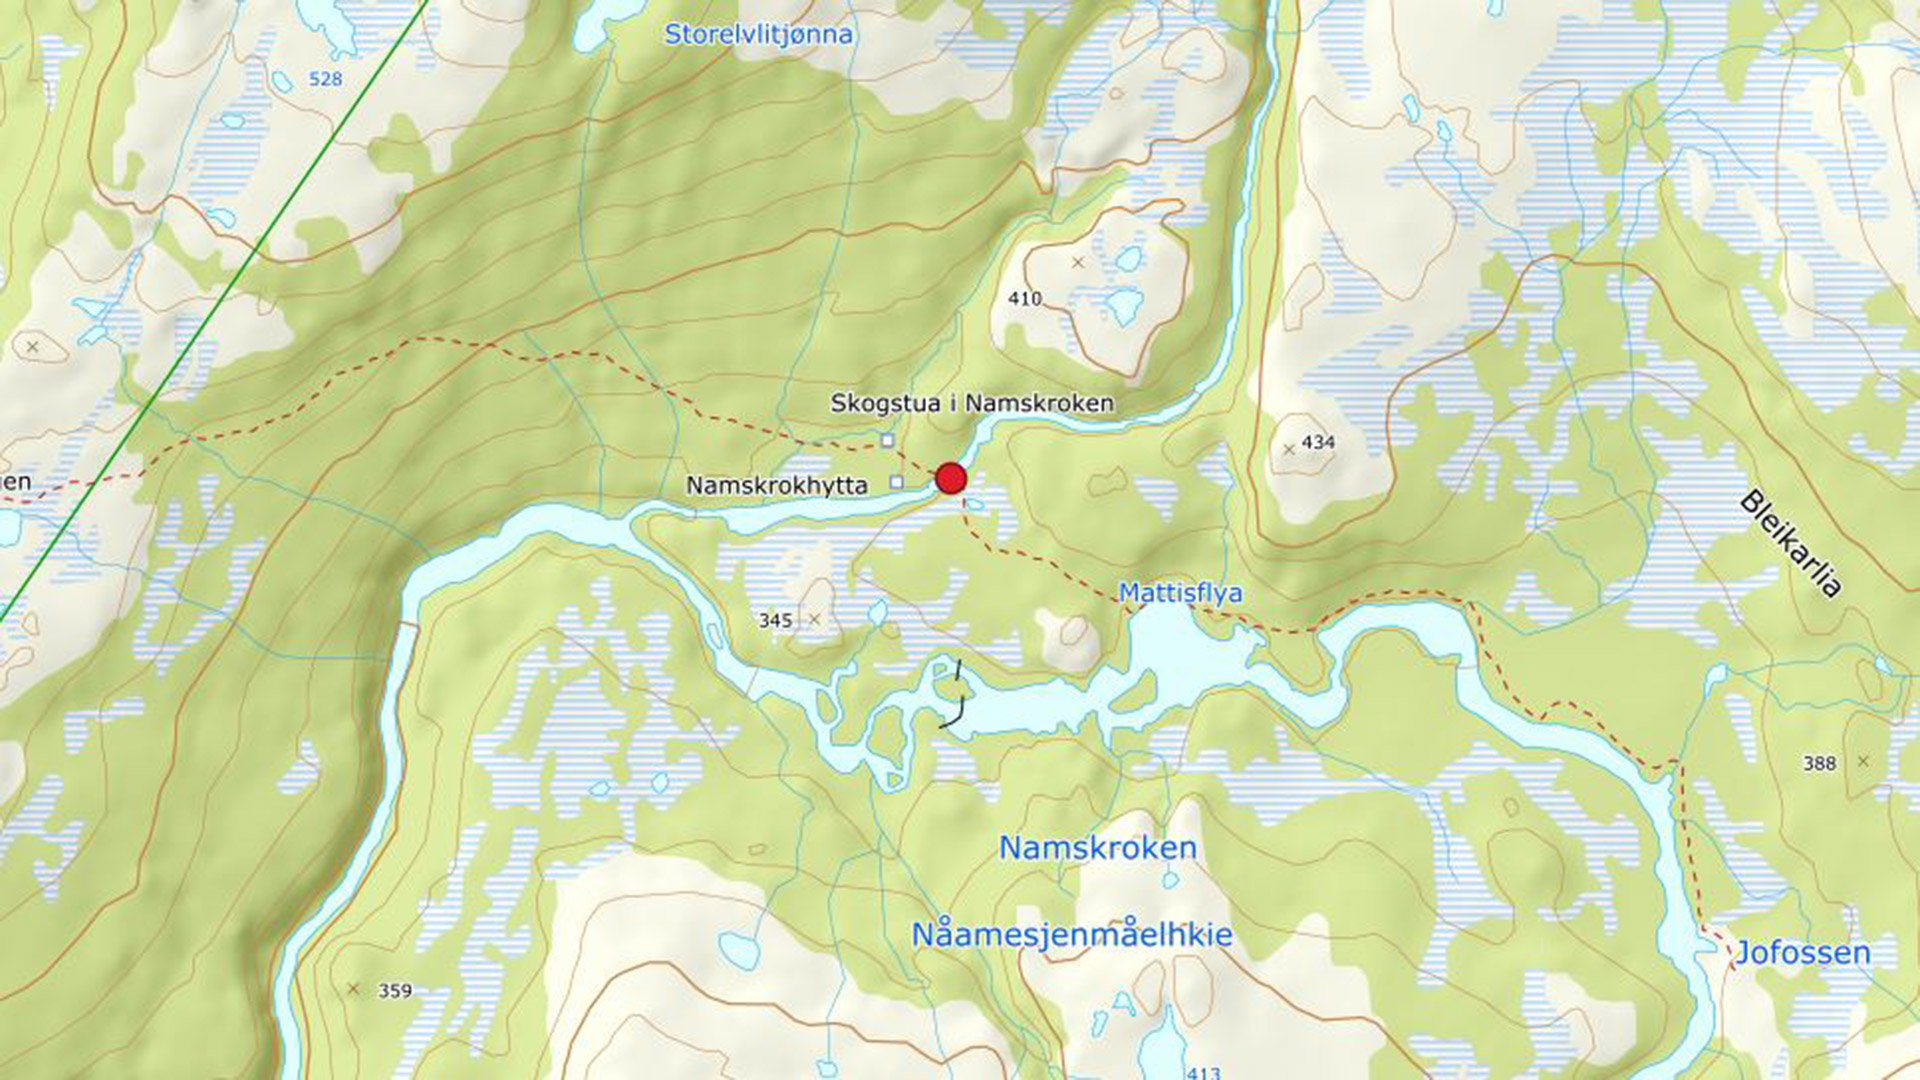 Map showing the location of the bridge over the Storelva in Namskroken